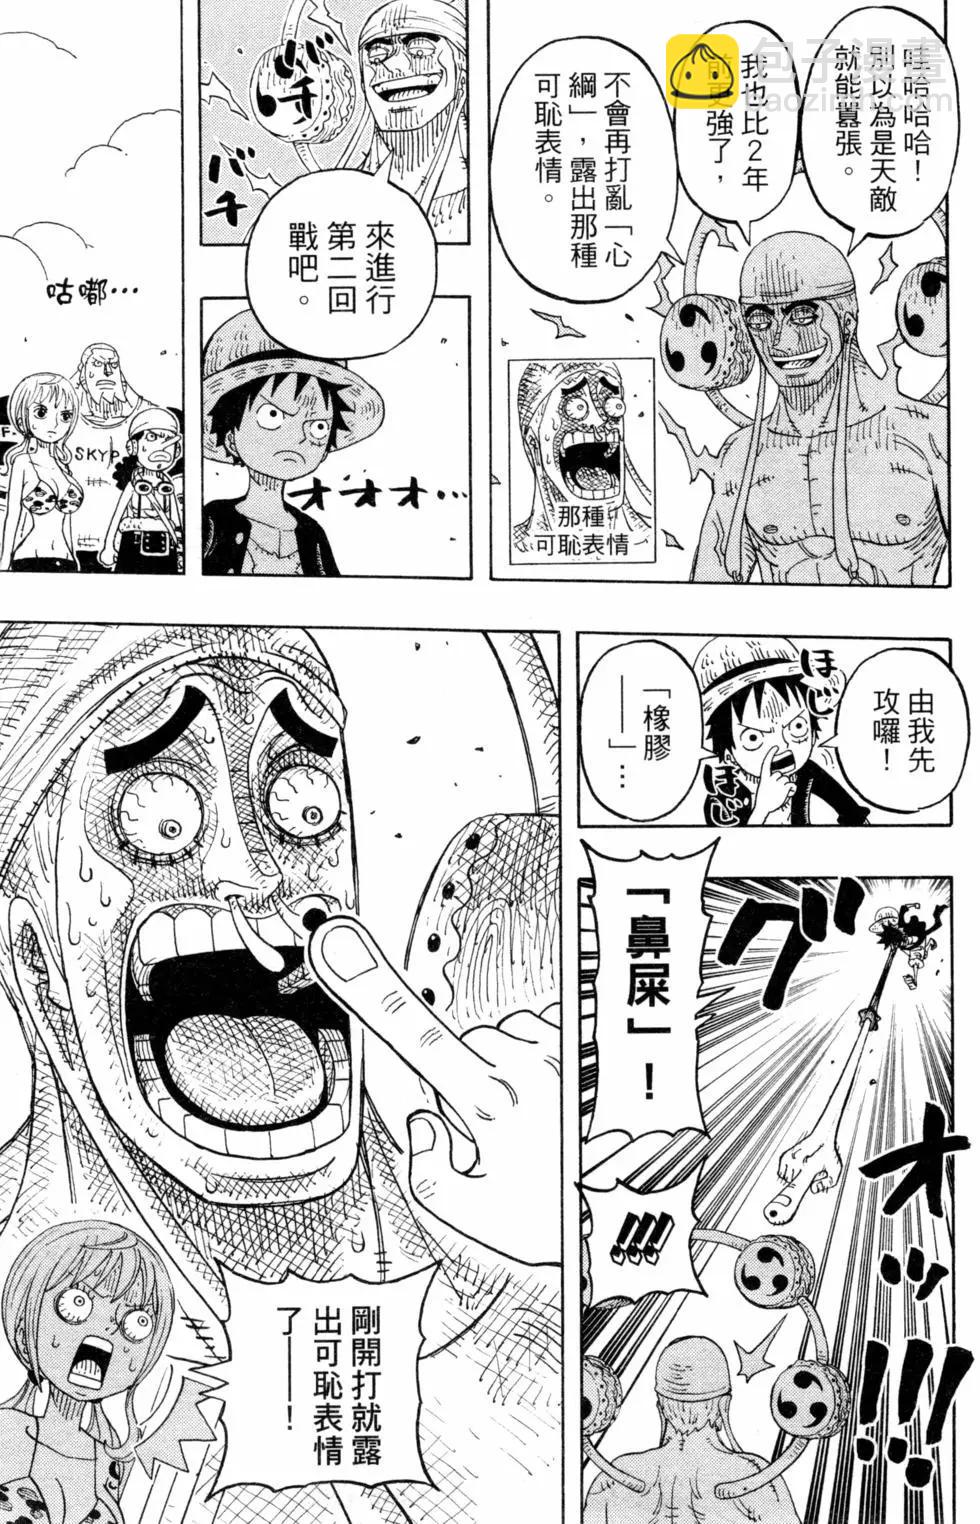 One piece party - 第06卷(2/4) - 2